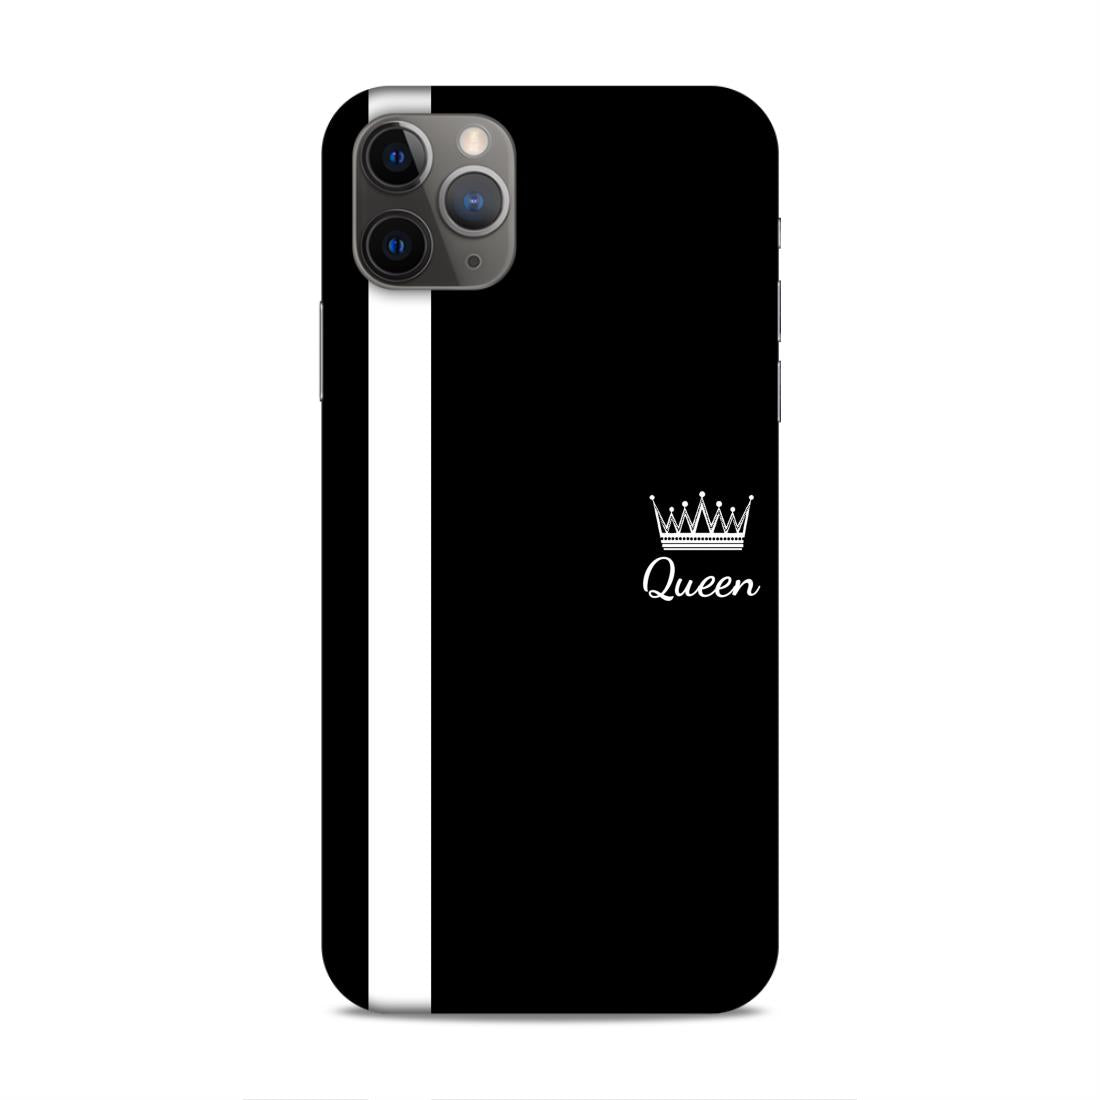 Queen Hard Back Case For Apple iPhone 11 Pro Max